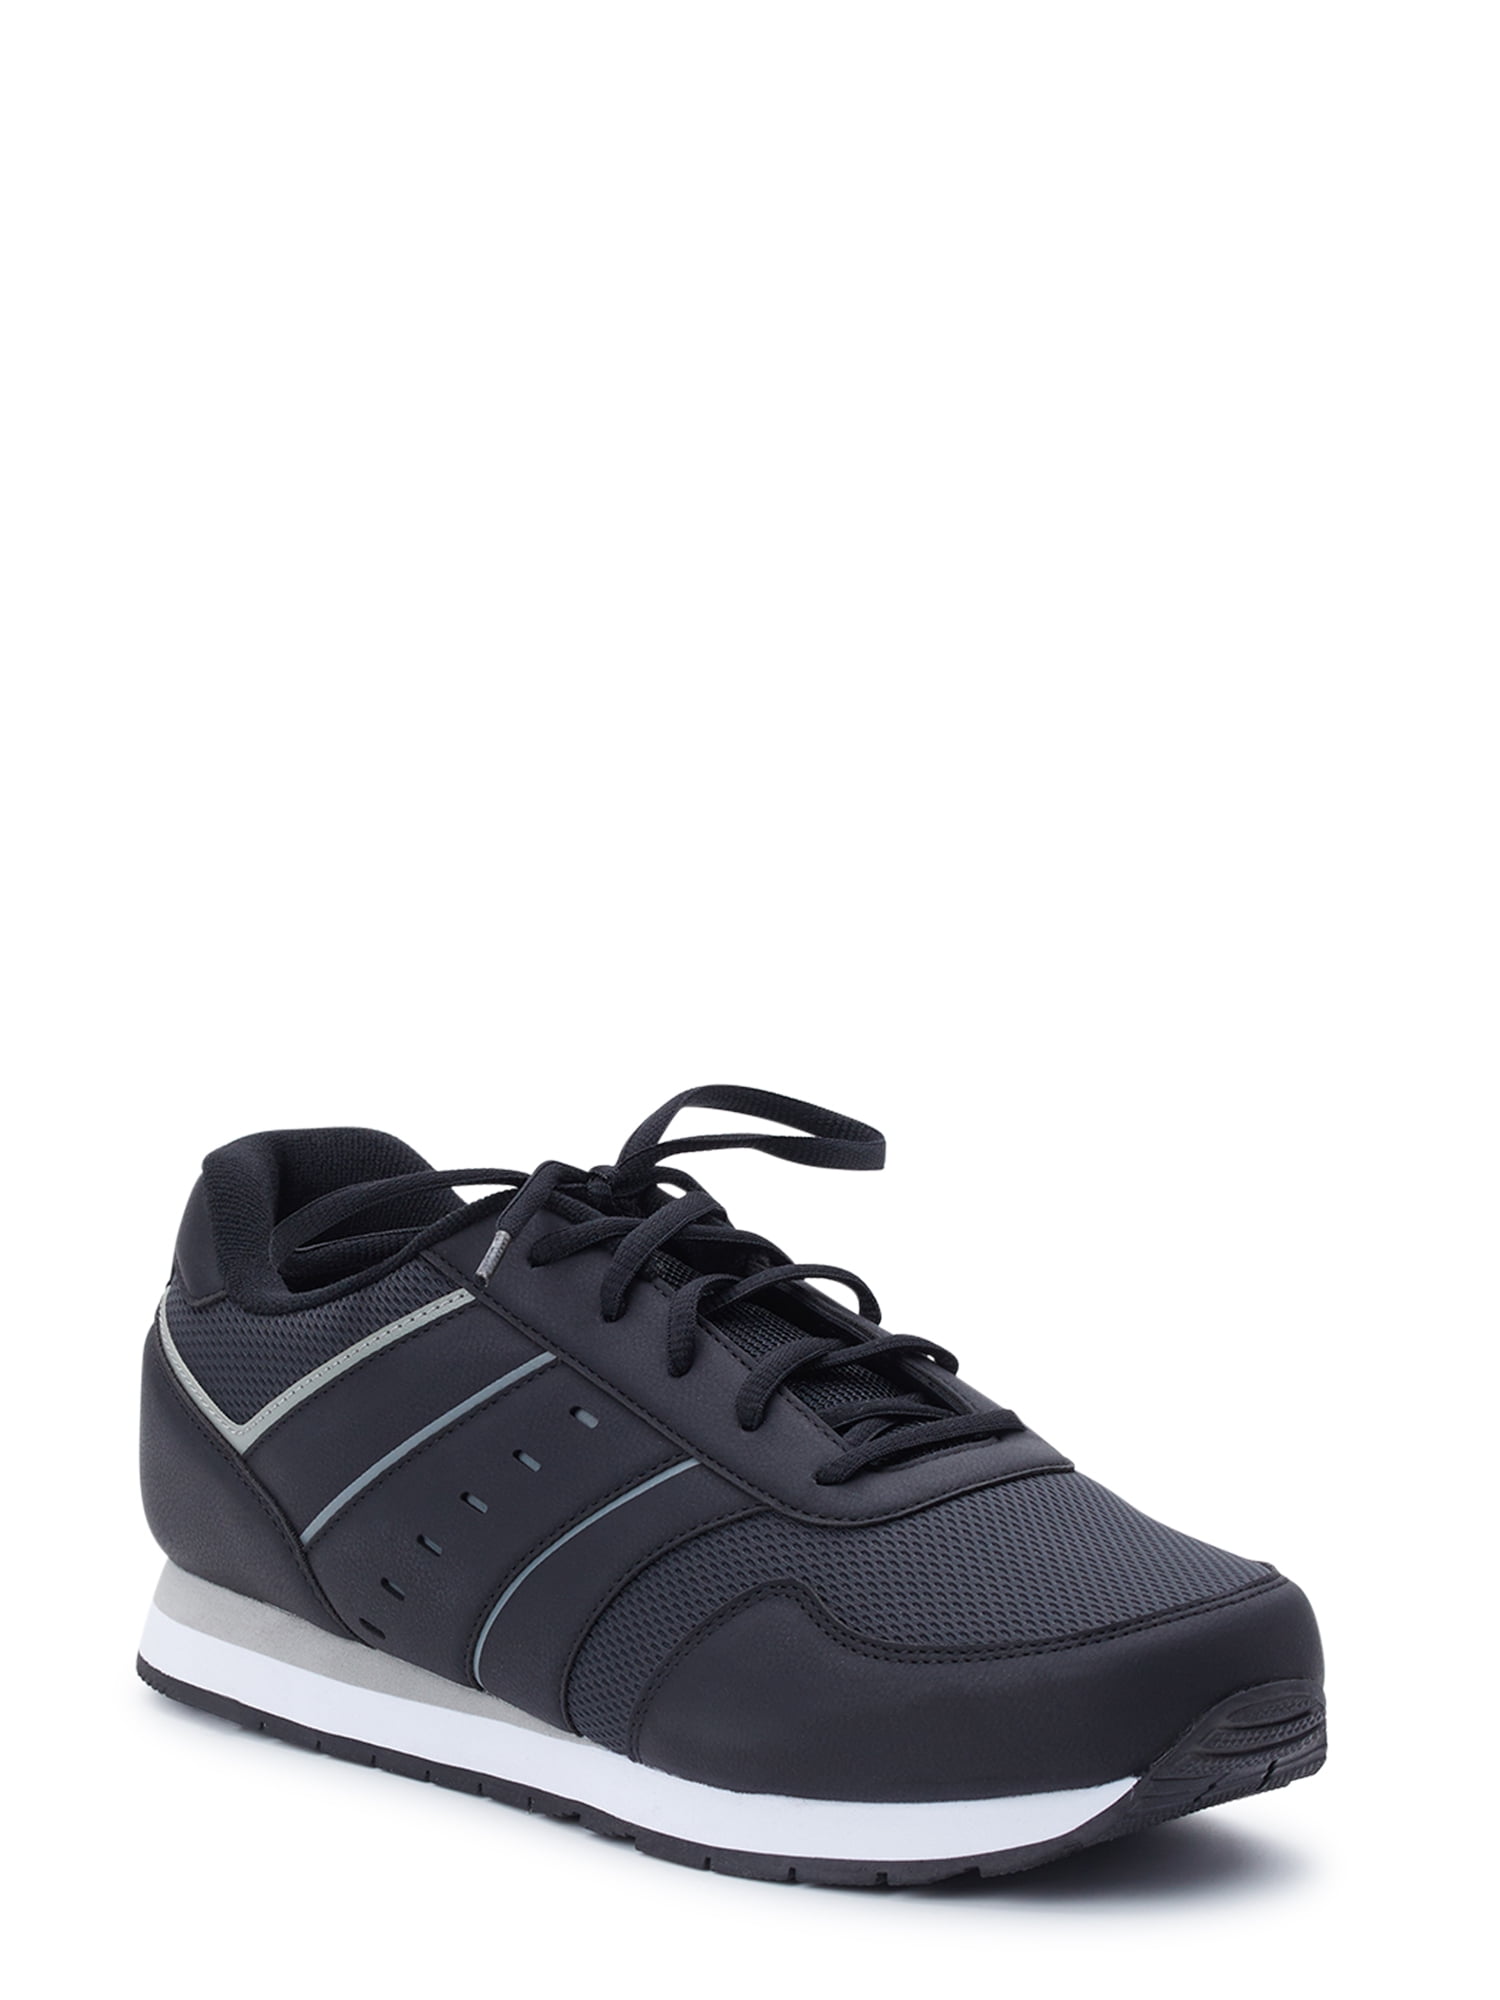 Athletic Works Men's Silver Series 3 Lace Up Wide Width Athletic